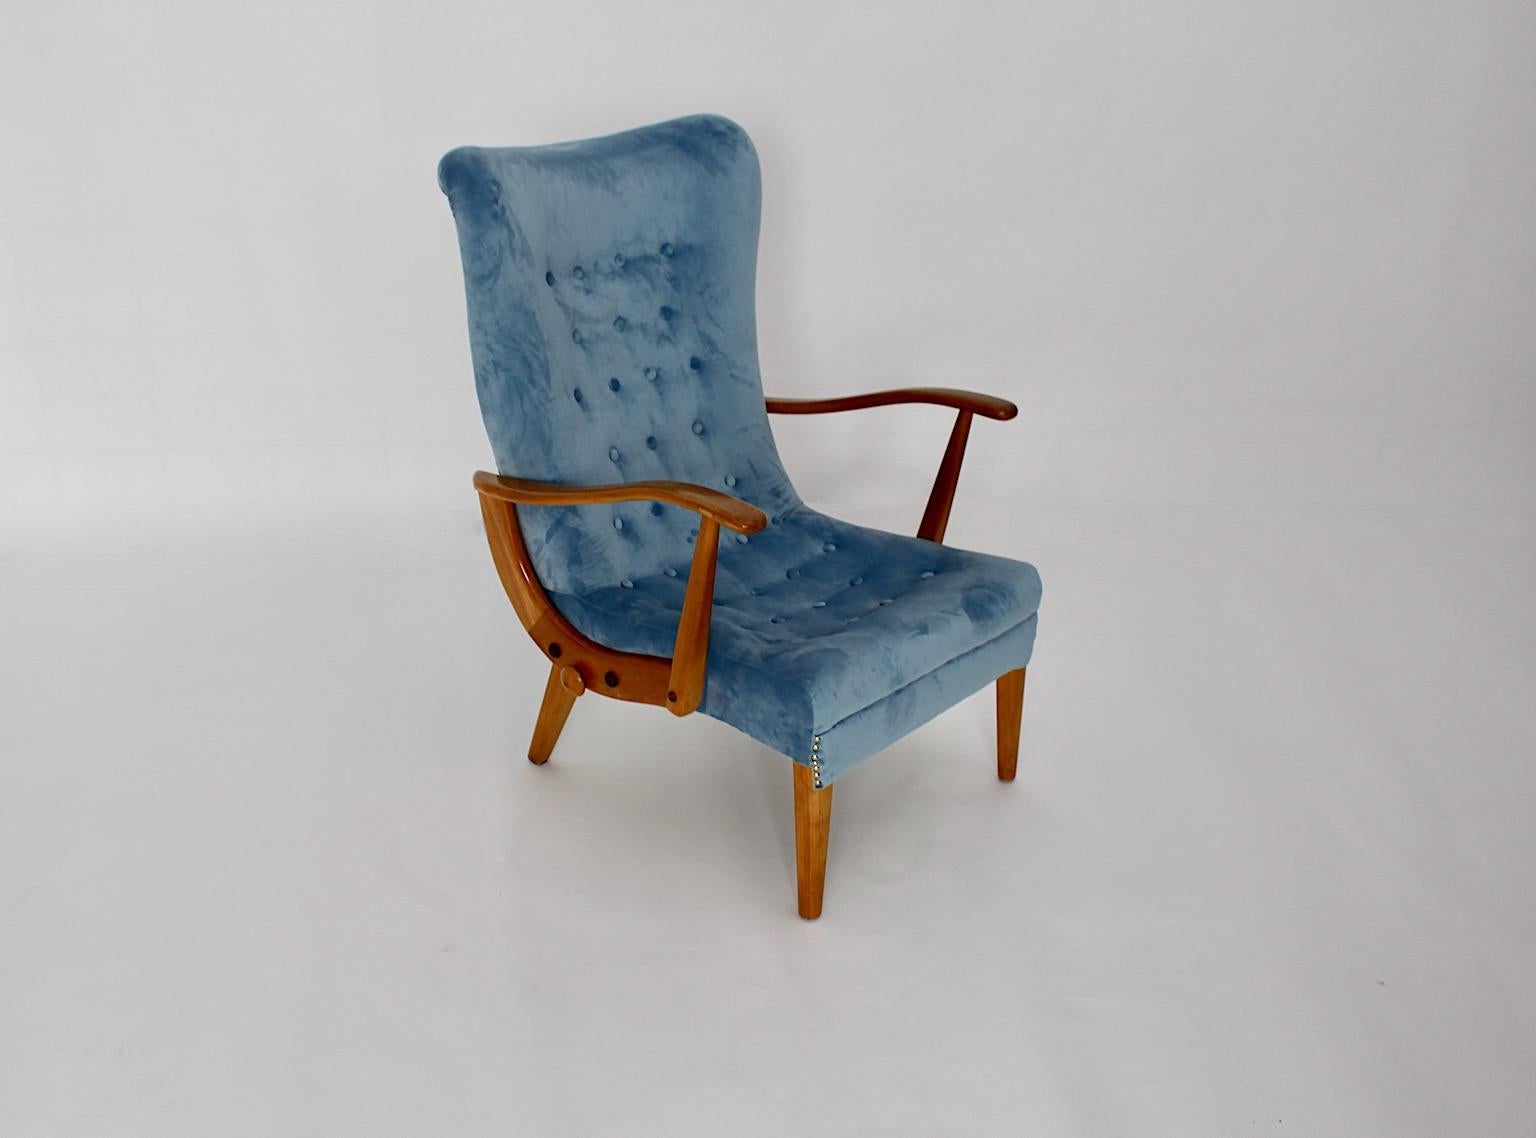 Mid-Century Modern vintage blue armchair lounge chairs from beech designed and manufactured Austria 1950s.
While the seat shell is newly covered with sky blue velvet fabric, the beech wooden frame demonstrates a stunning honey brown tone.
Very